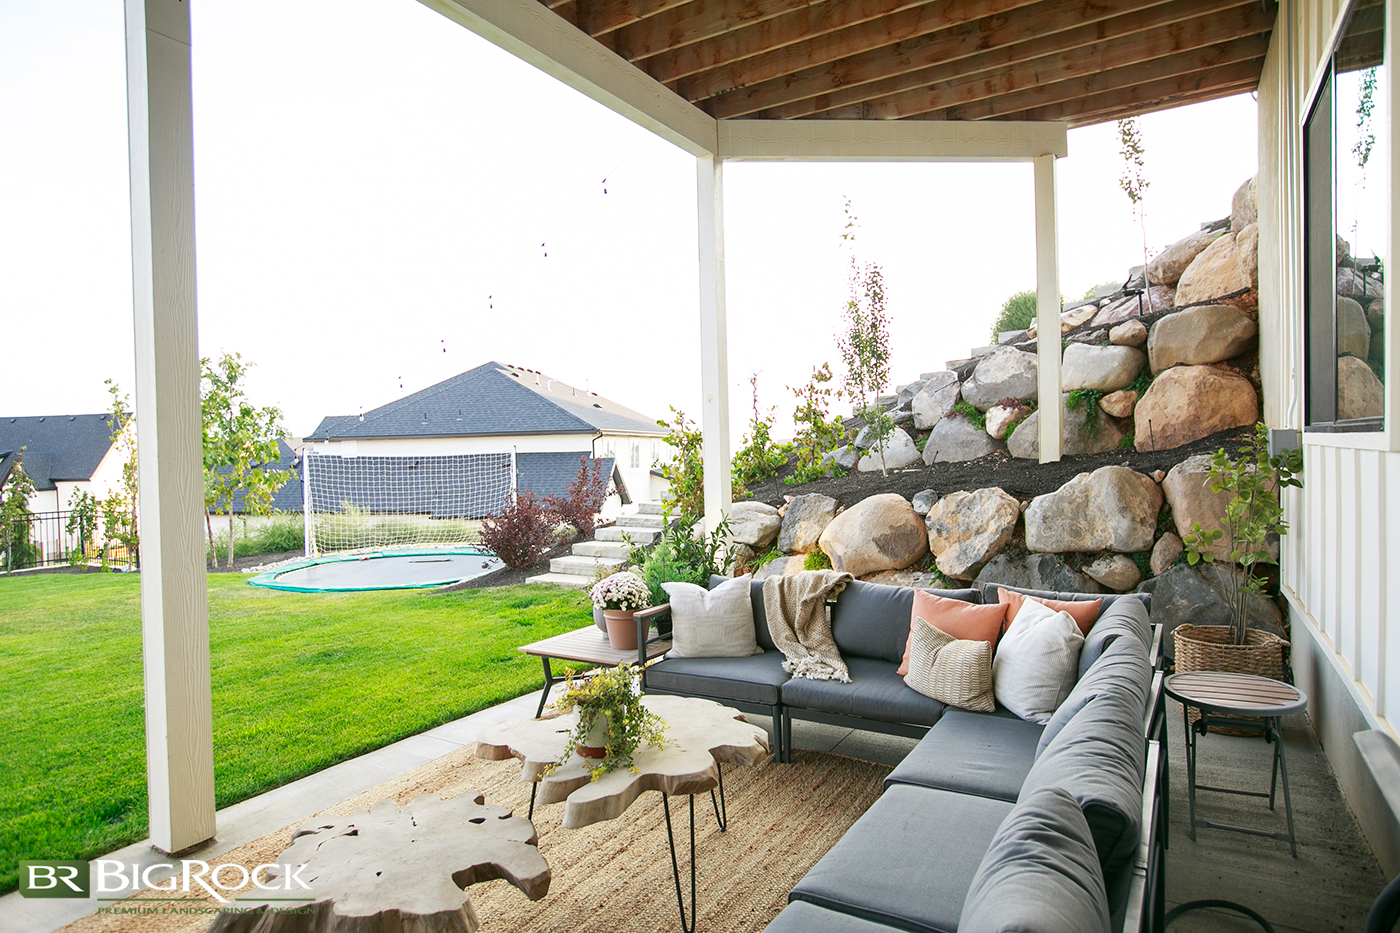 Create an outdoor living area under your backyard patio. Watch over the kids jumping on inground trampoline. Big Rock Landscaping will design your backyard with the entire family in mind.